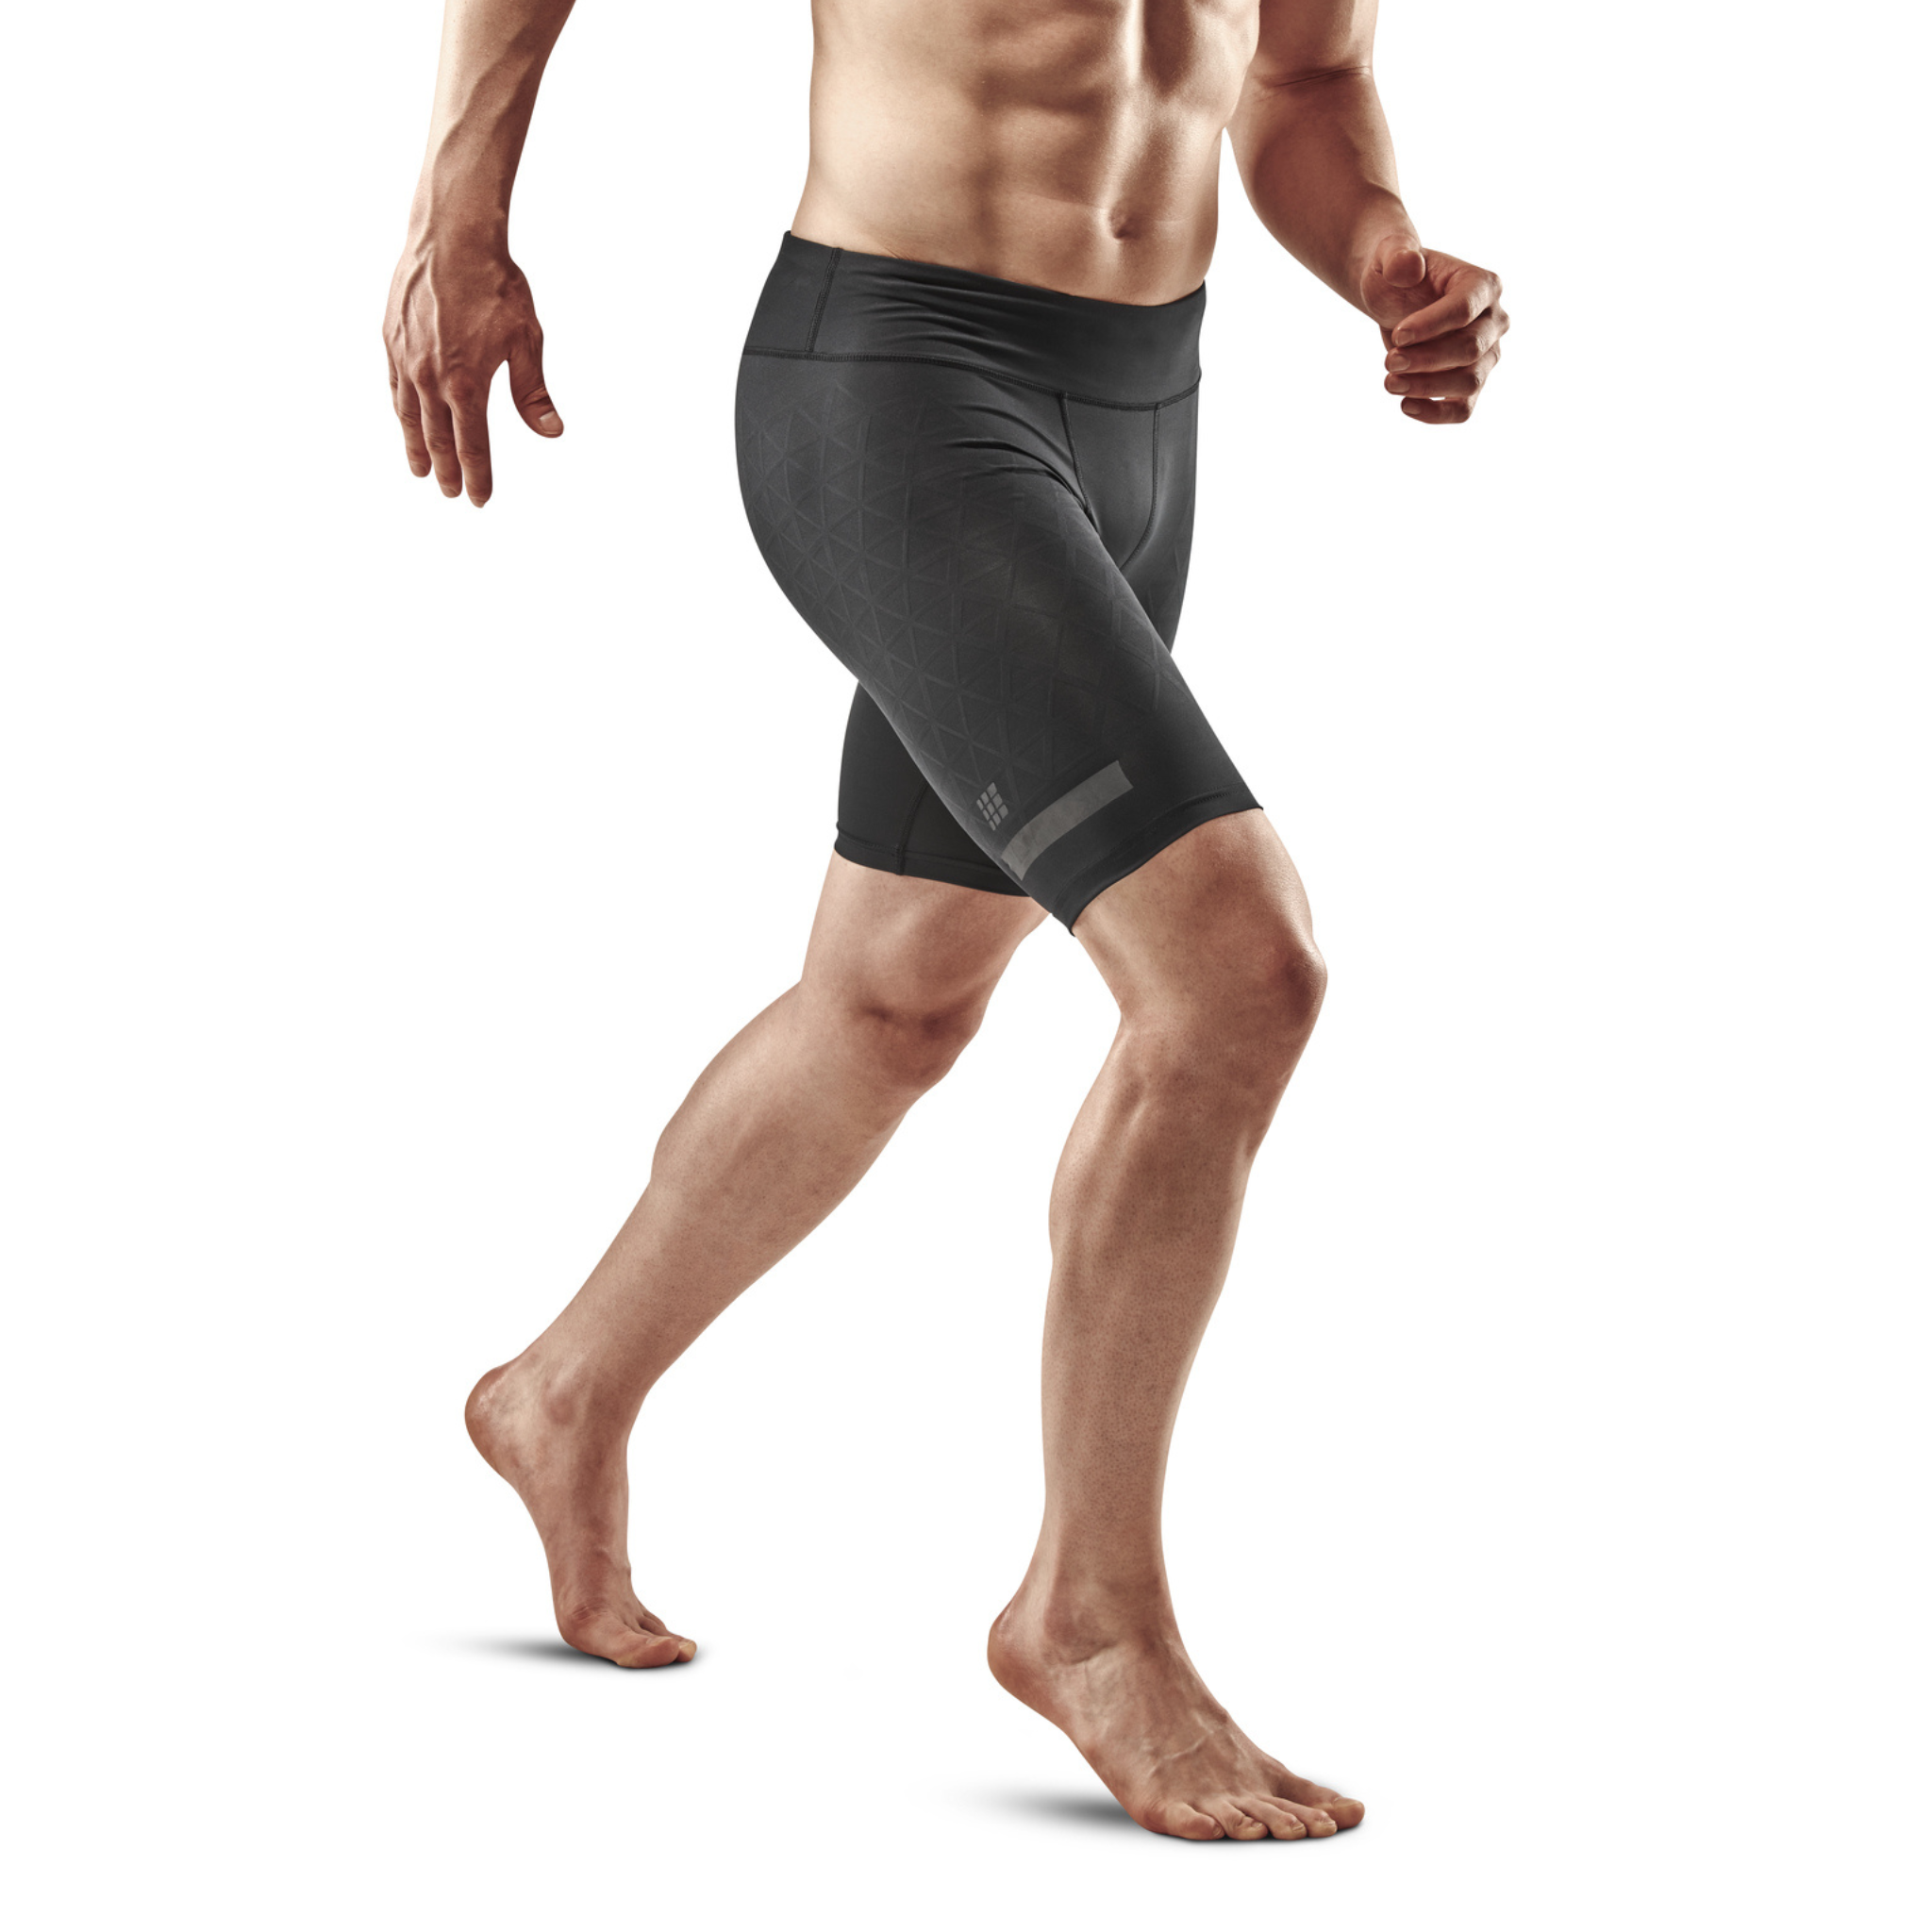 The run support shorts, hombres, negro